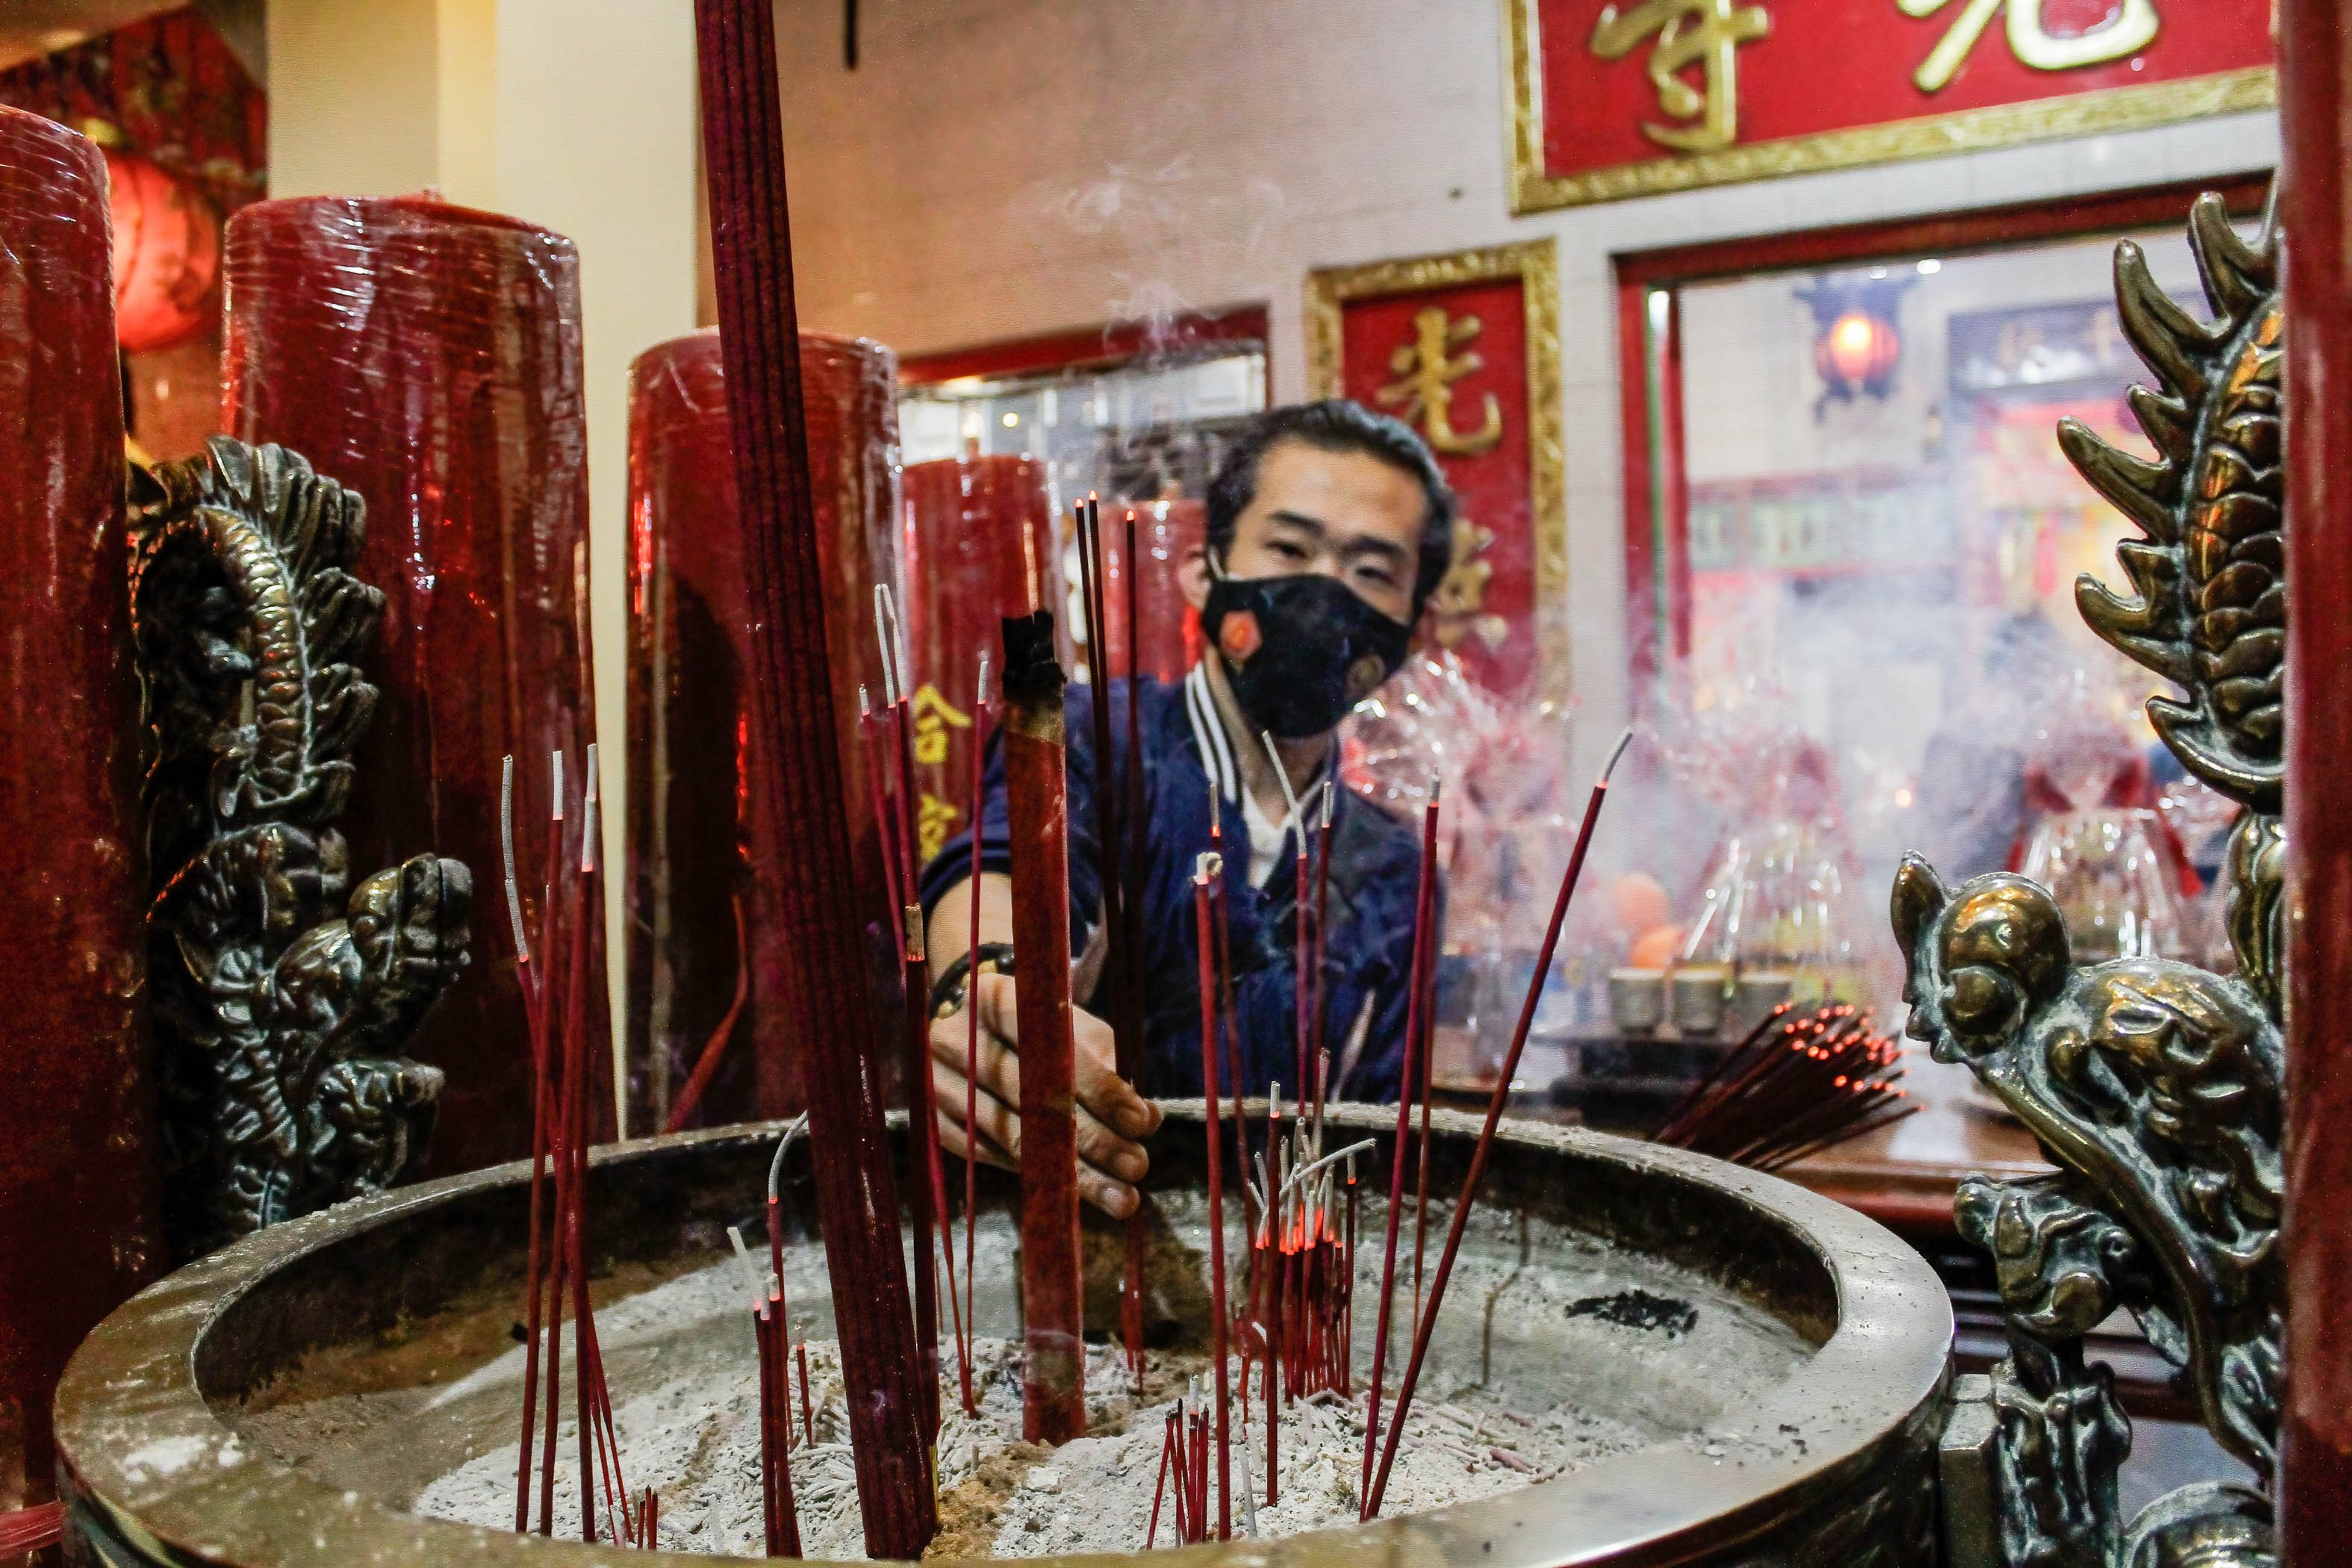 A Chinese man prays with incense sticks during the